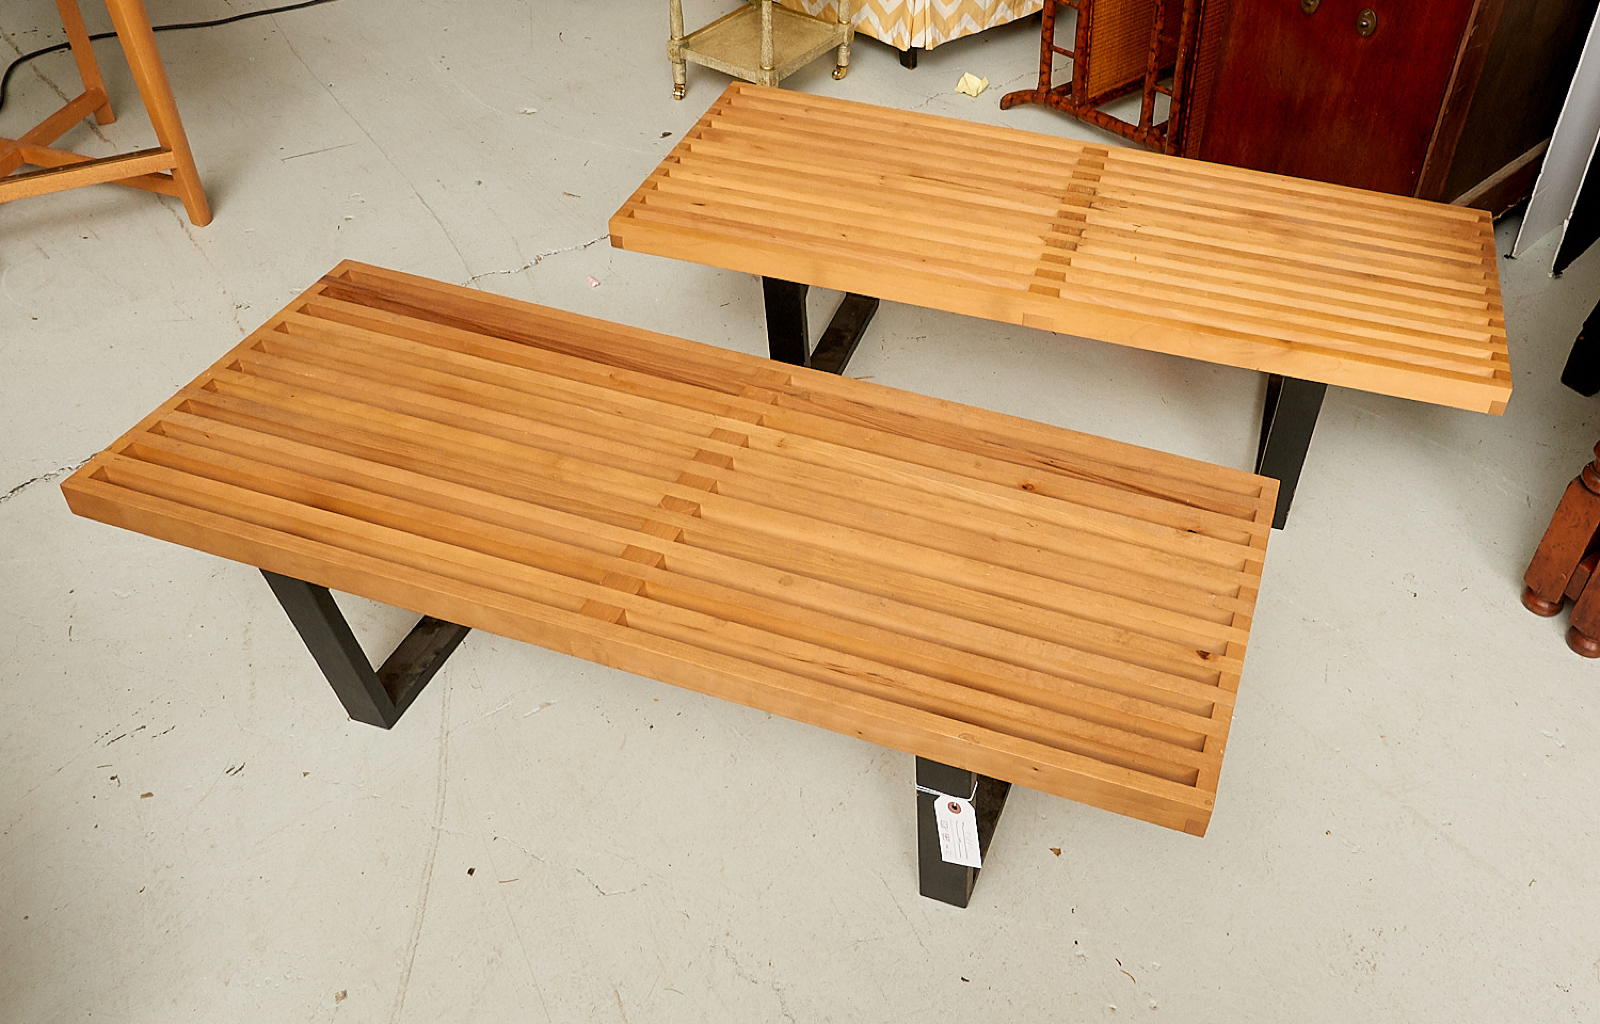 PAIR GEORGE NELSON STYLE SLAT BENCHES 2cedad